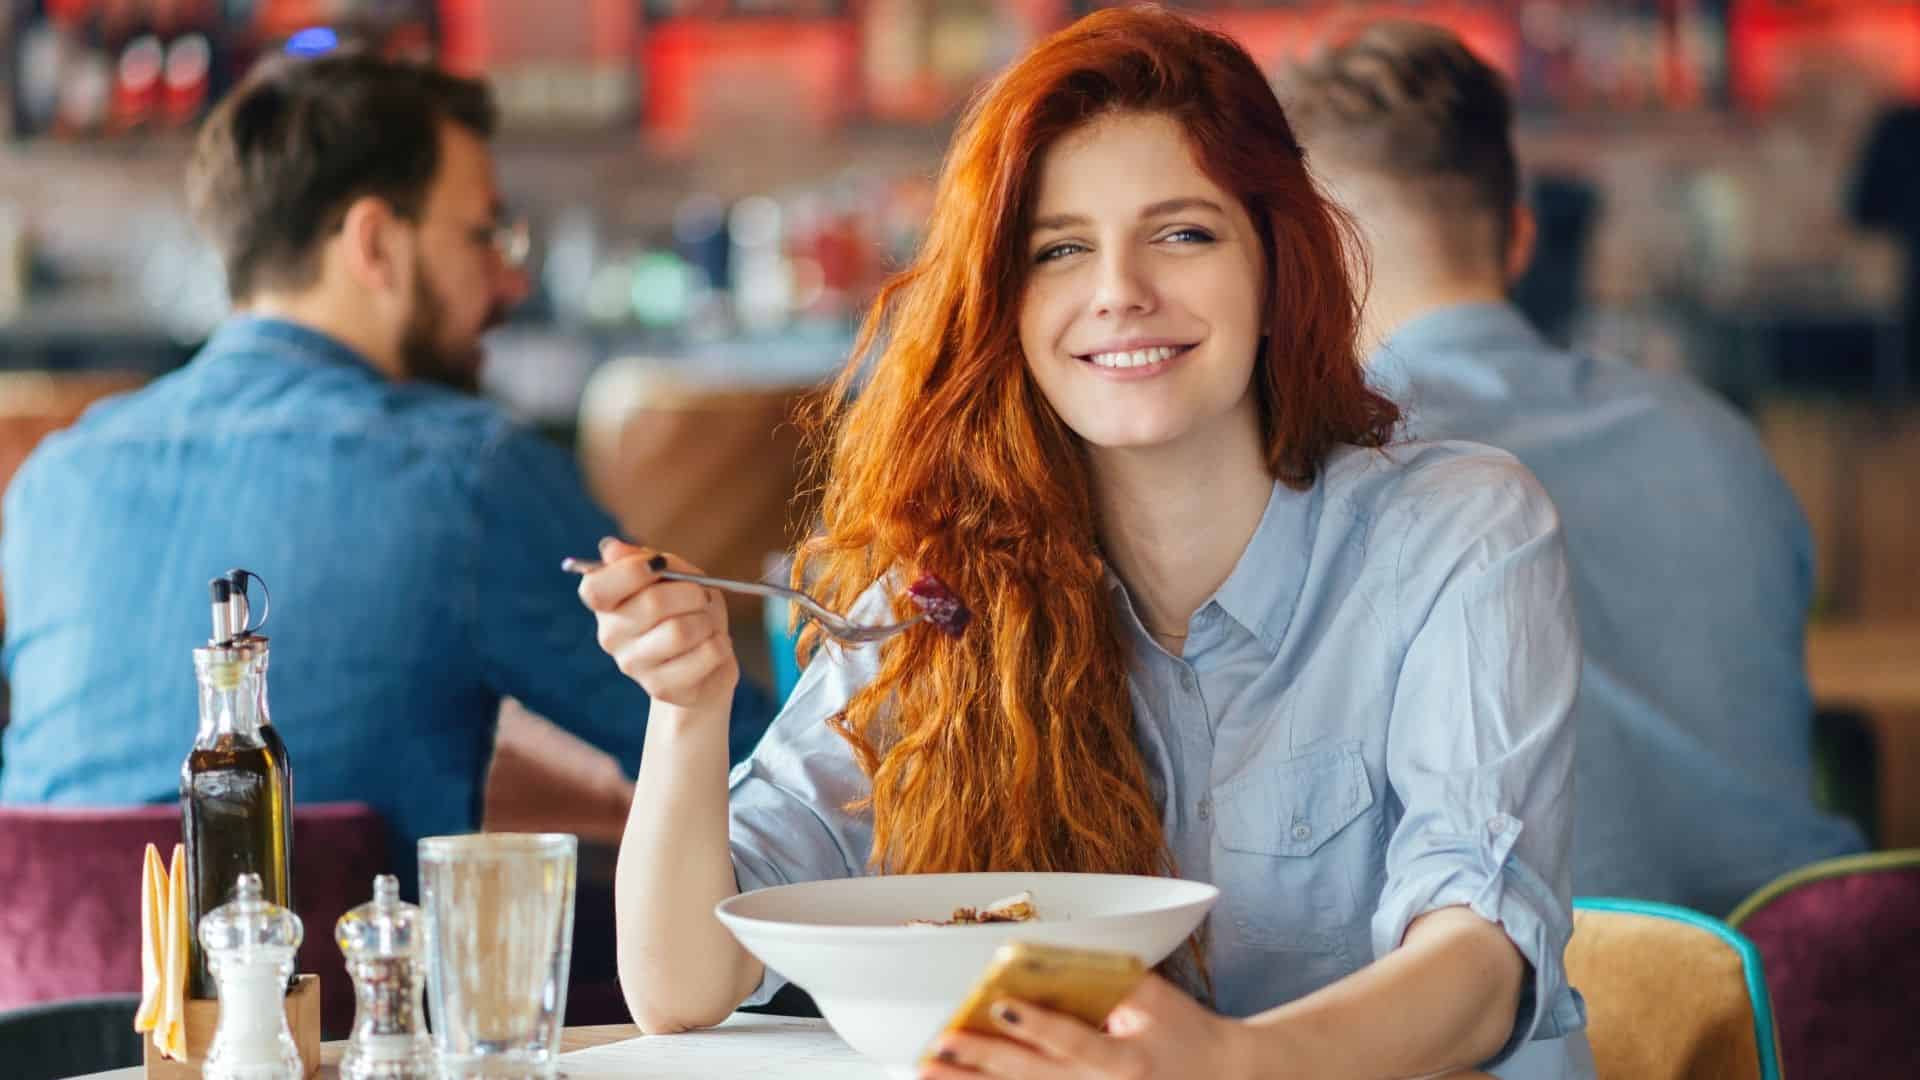 Top 10 Foods for Healthy Red Hair